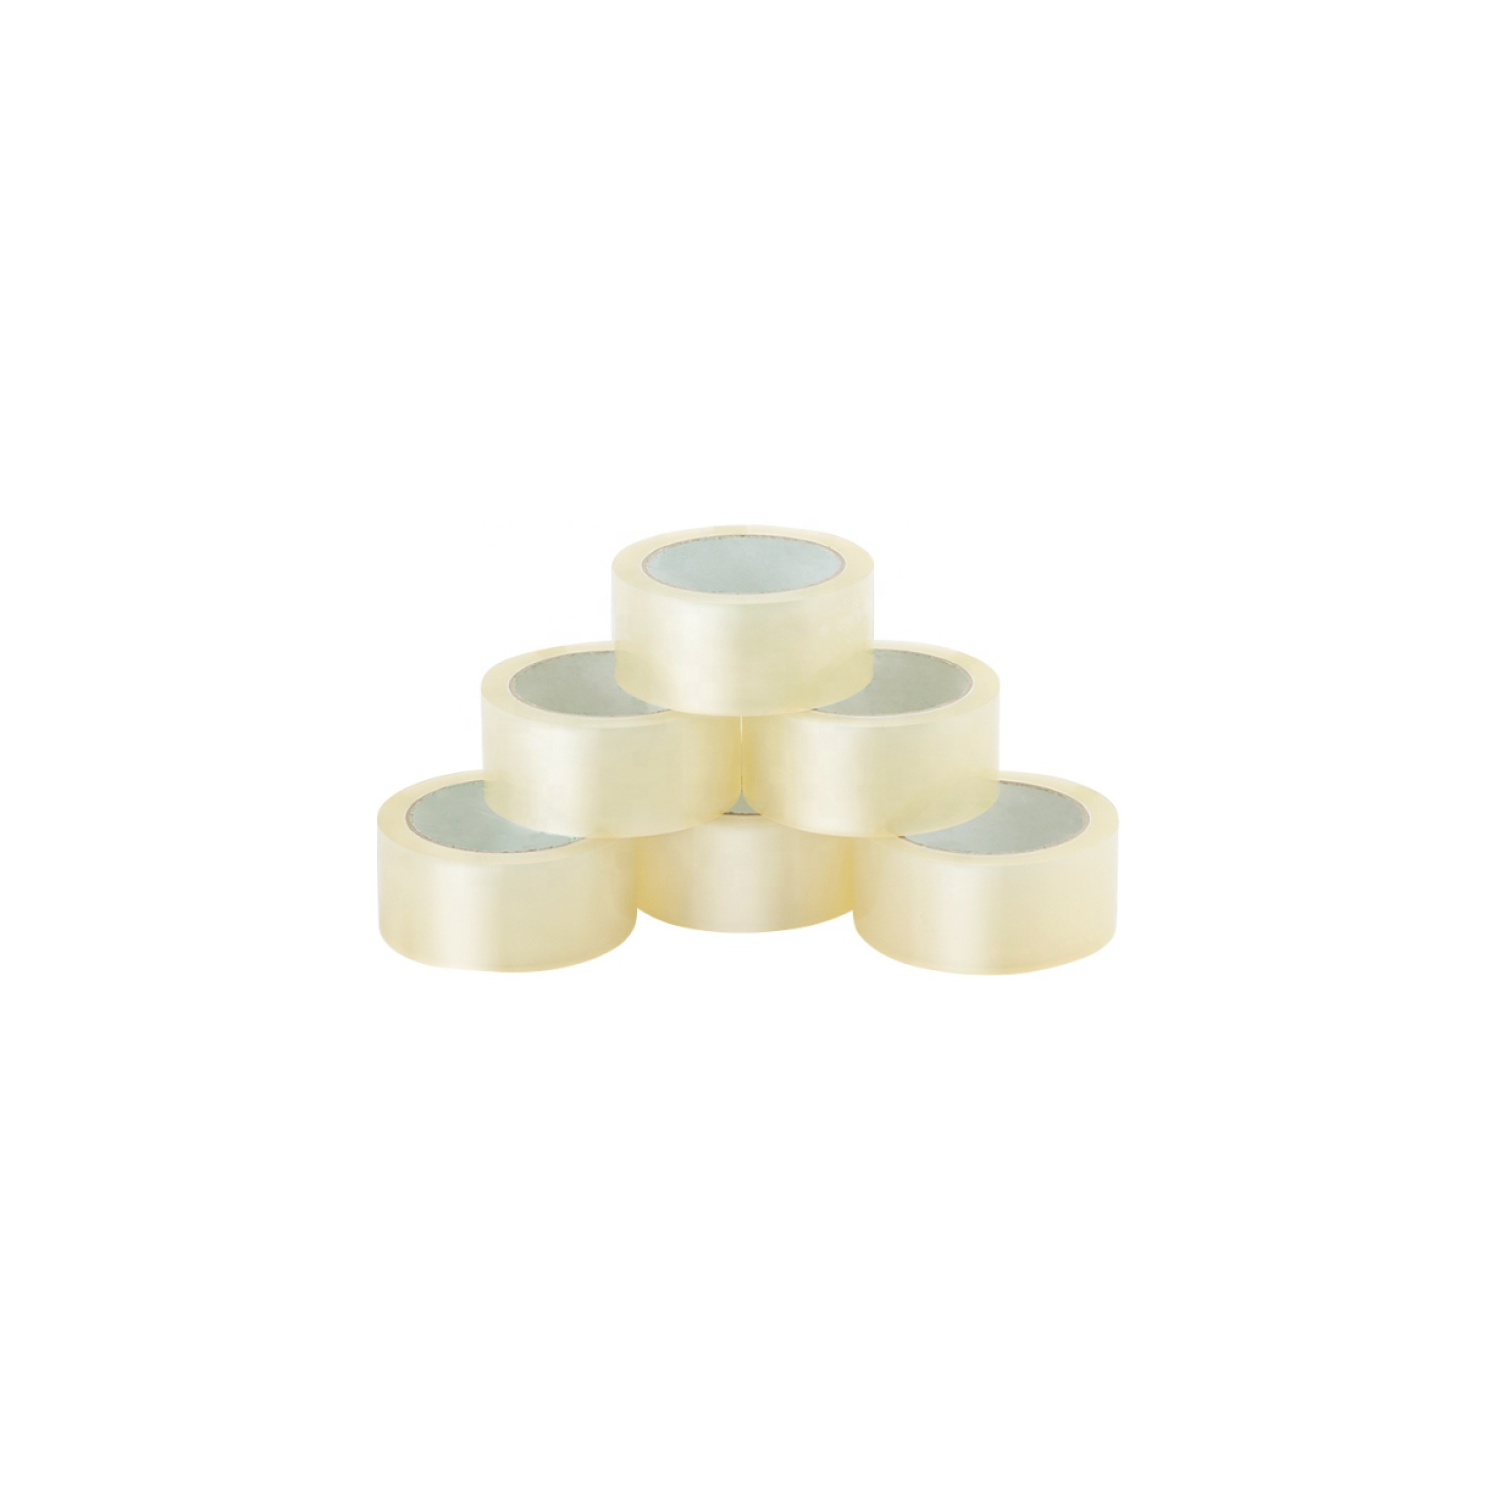 Concord Packing Tape 2 x 110 Yards, Clear (Pack of 6) buy in stock in U.S.  in IDL Packaging